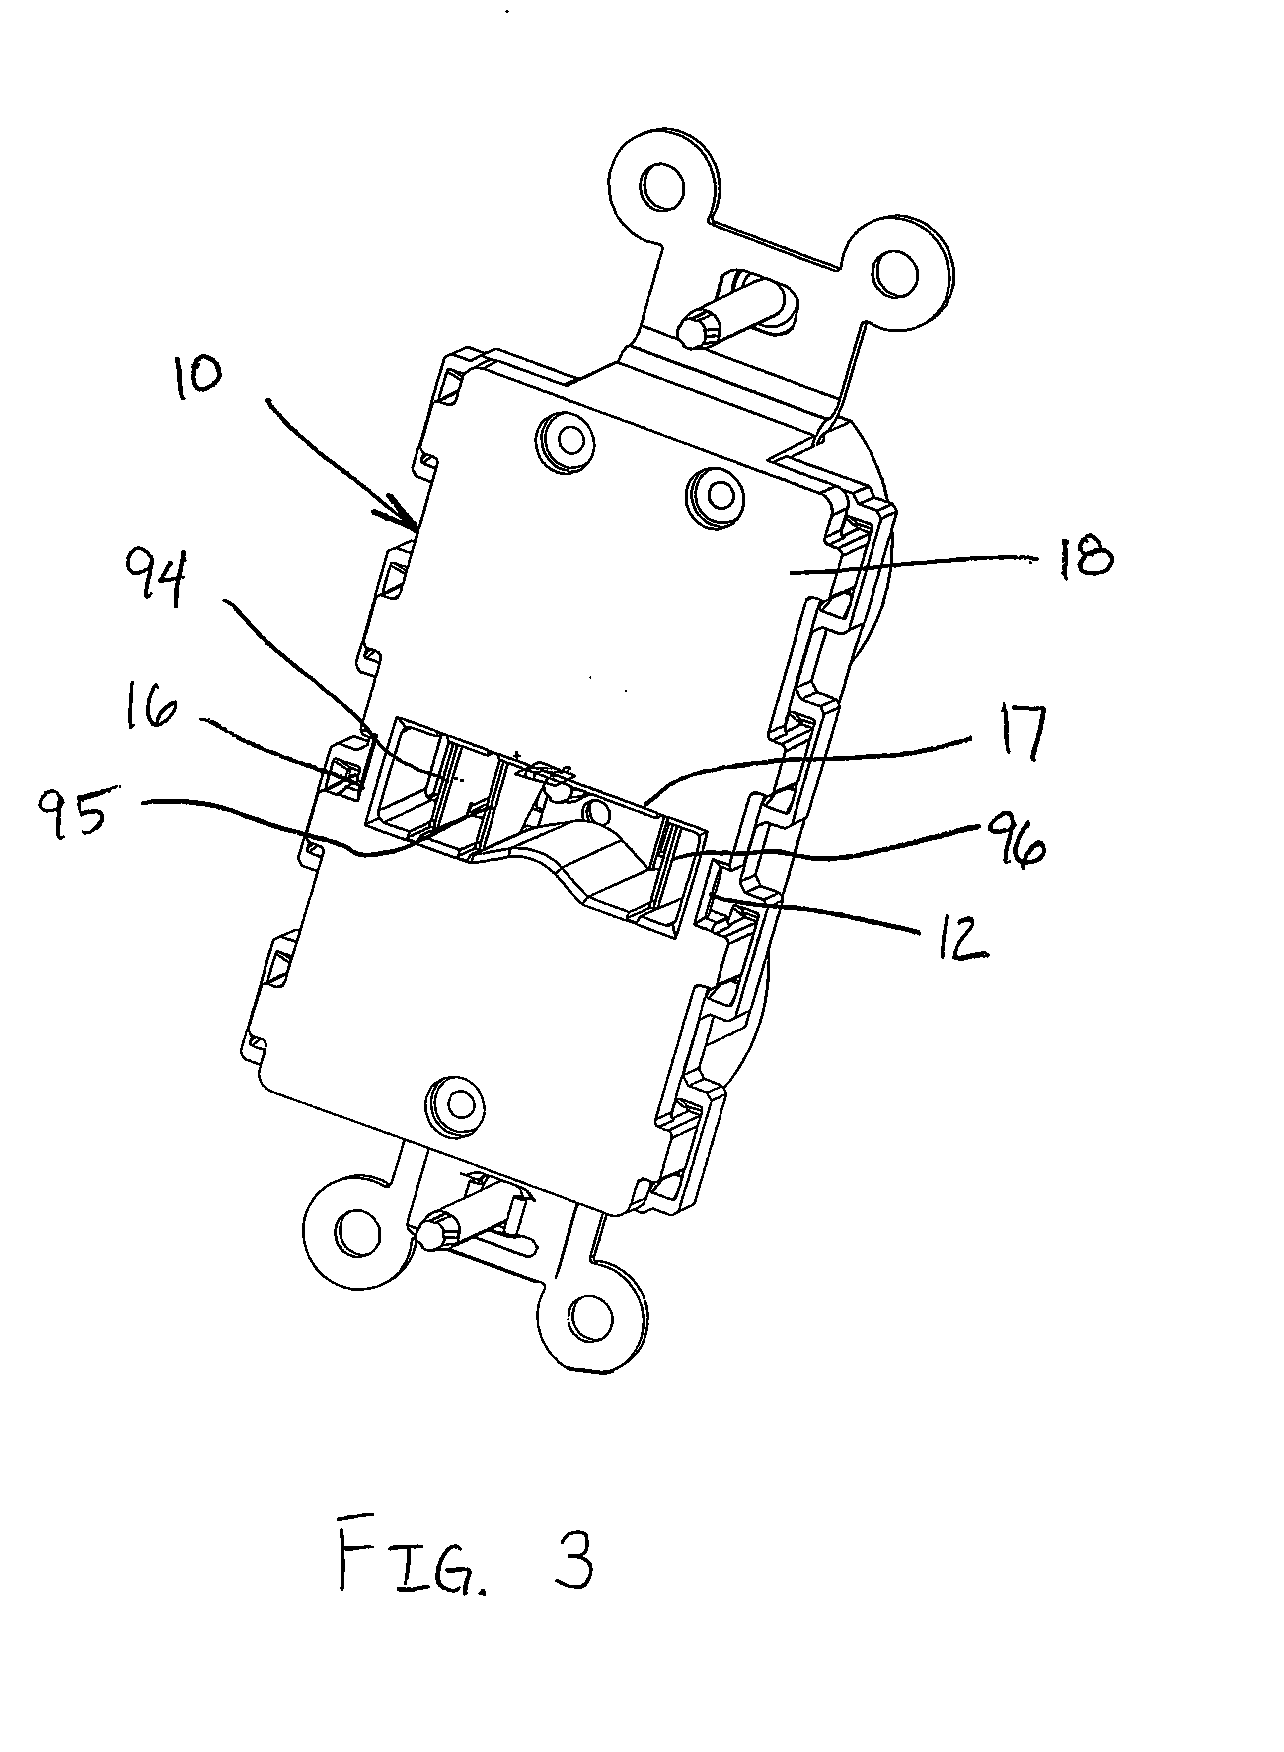 Dual latch electrical plug connector for electrical receptacle